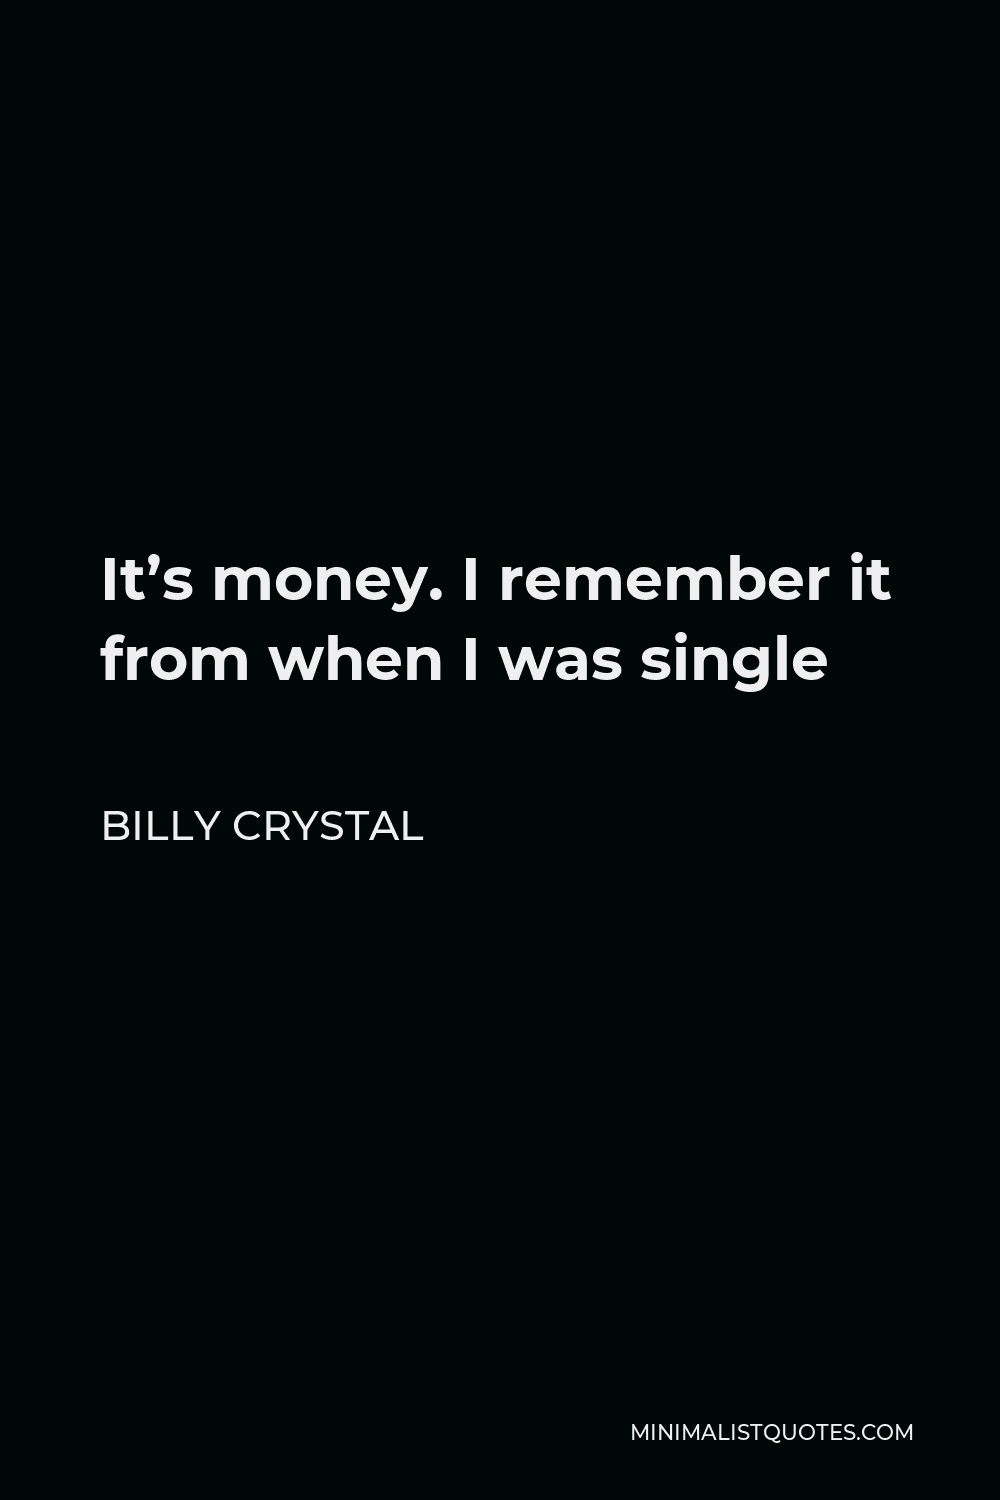 Billy Crystal Quote - It’s money. I remember it from when I was single